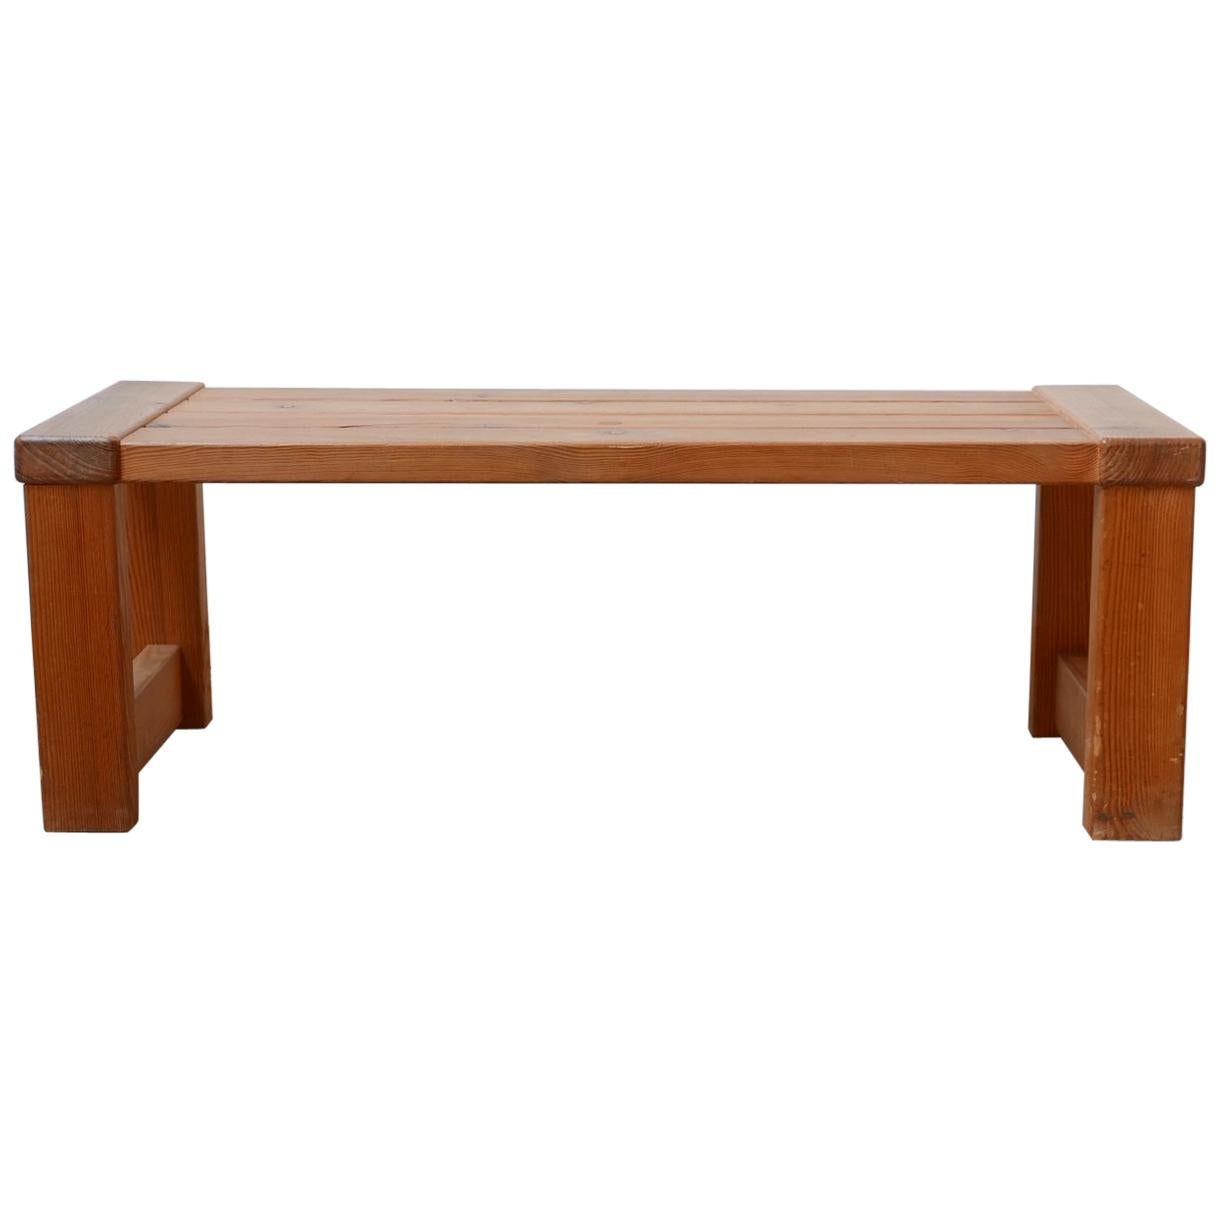 Swedish Pine Midcentury Bench or Coffee Table For Sale